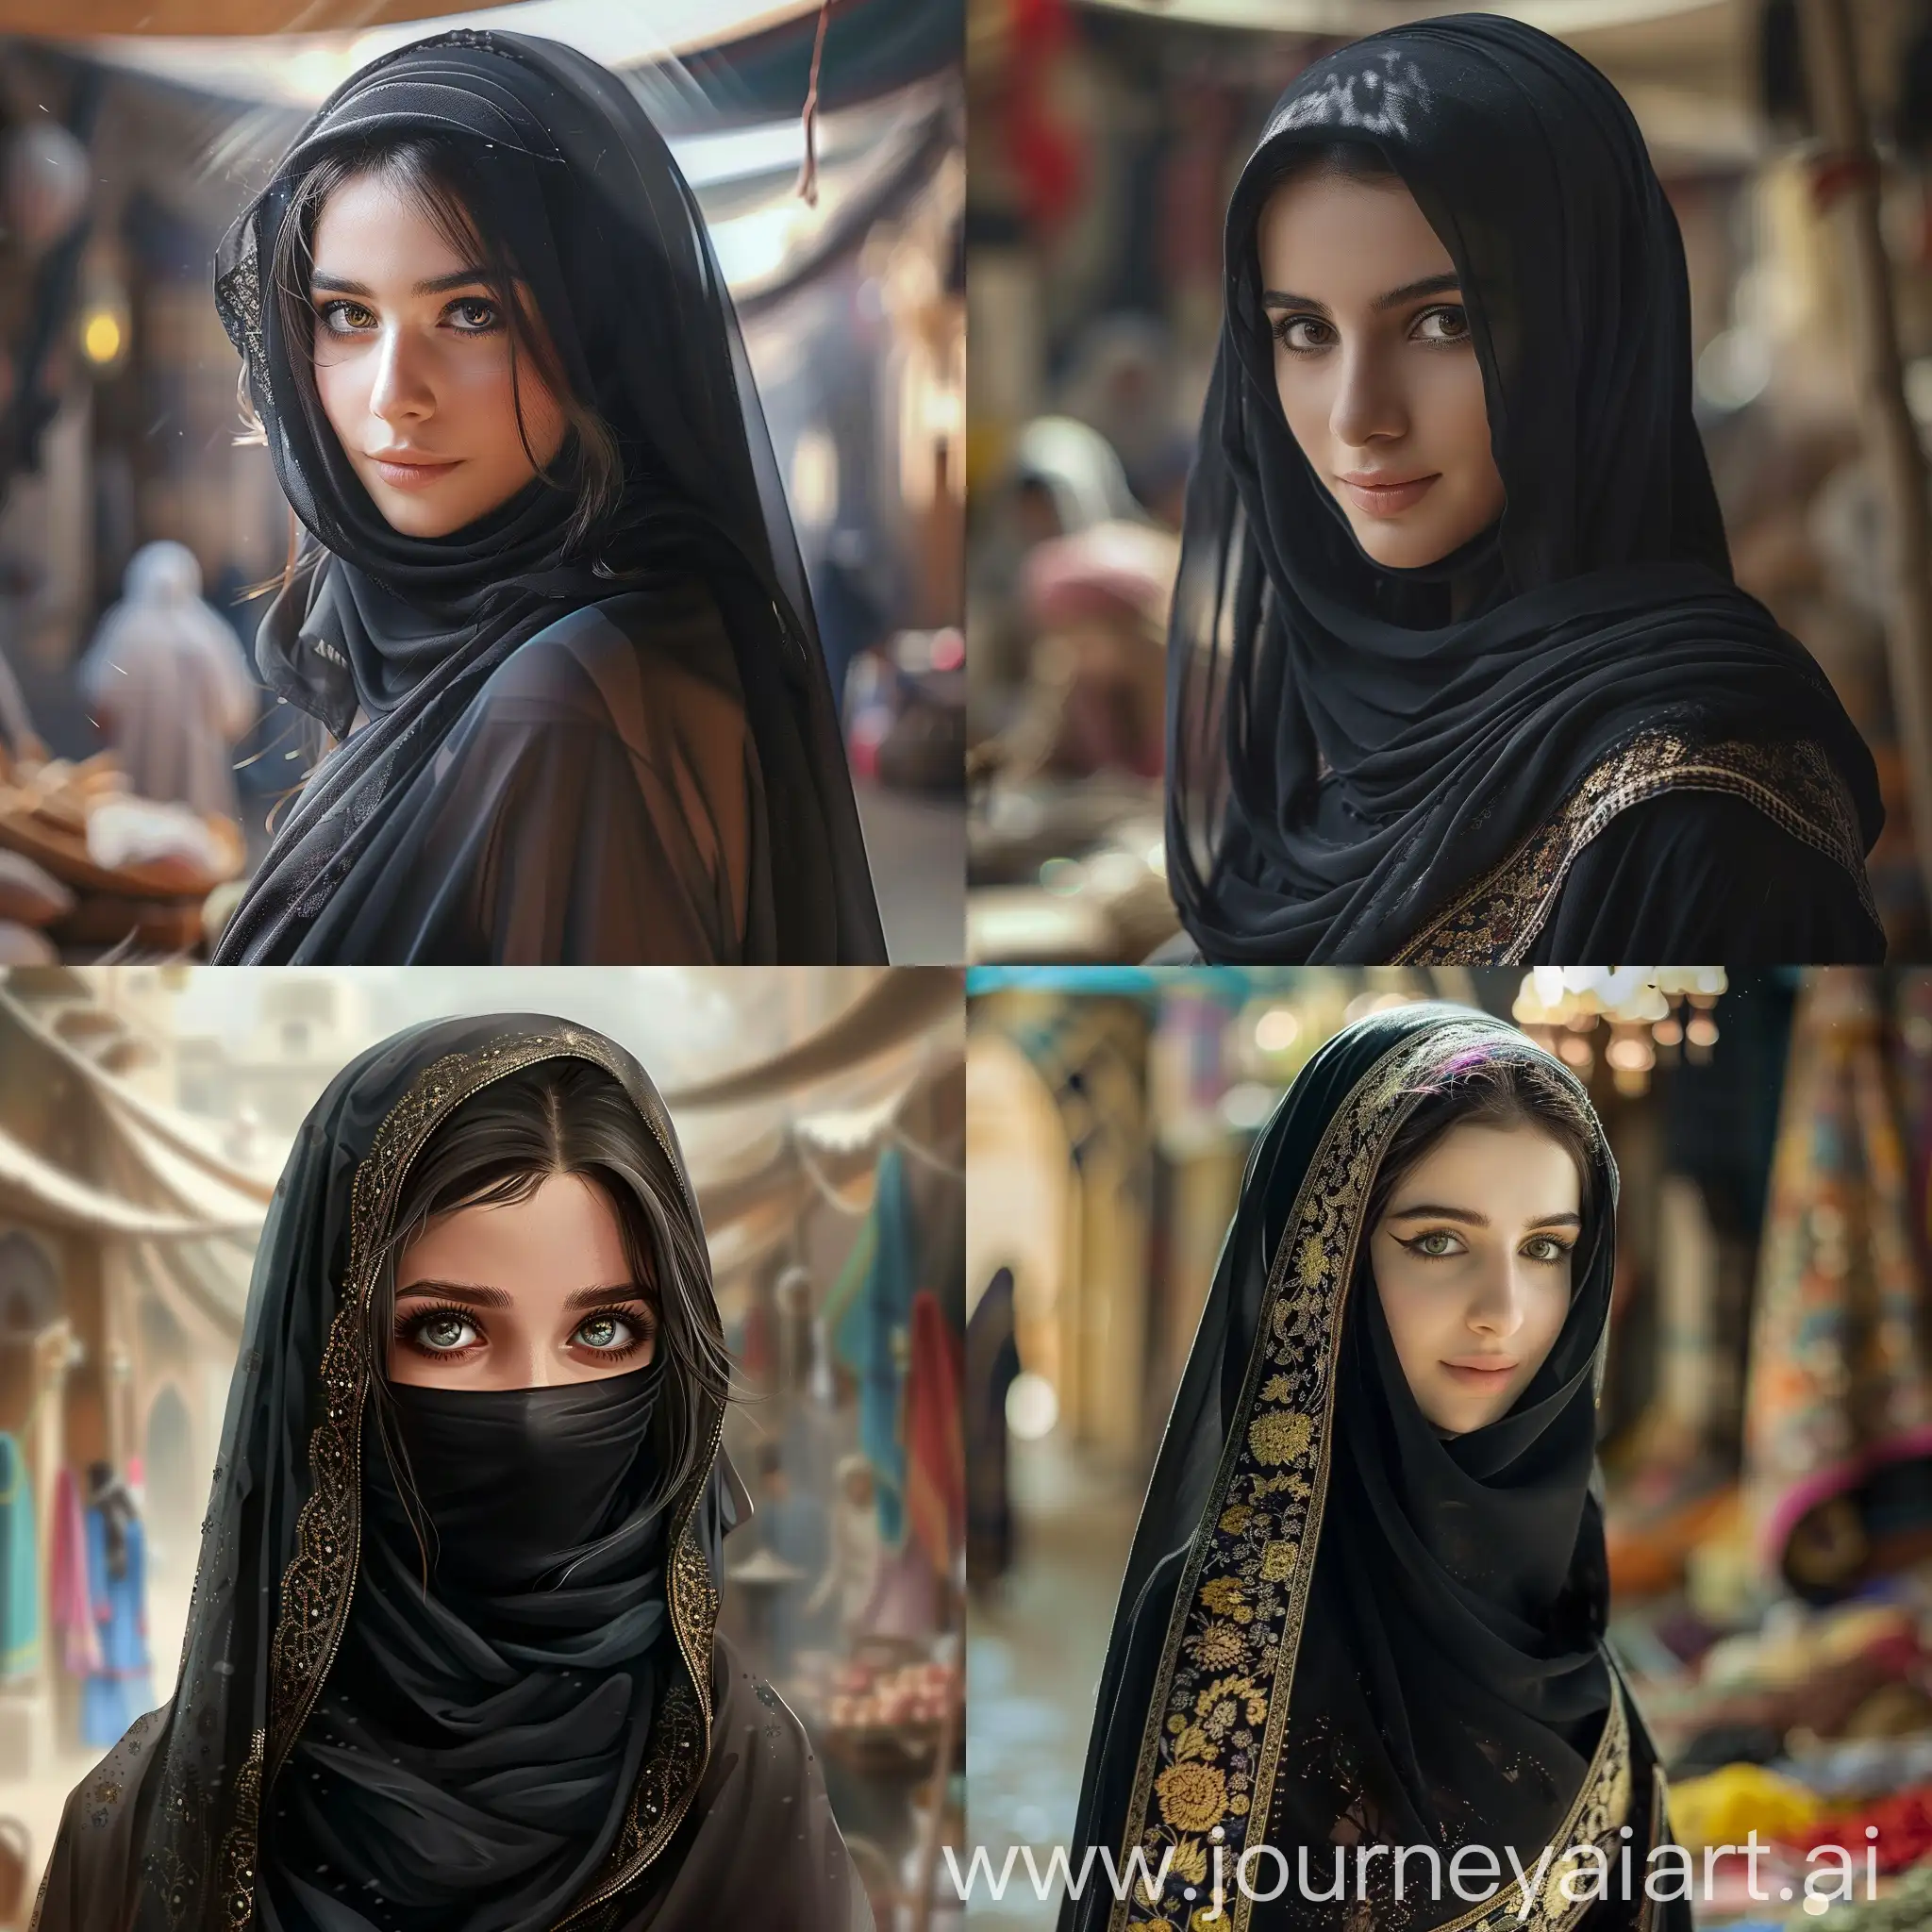 A beautiful young Iranian woman in the 8th century with a beautiful black niqab in the market of Pars, a fantasy and romantic image